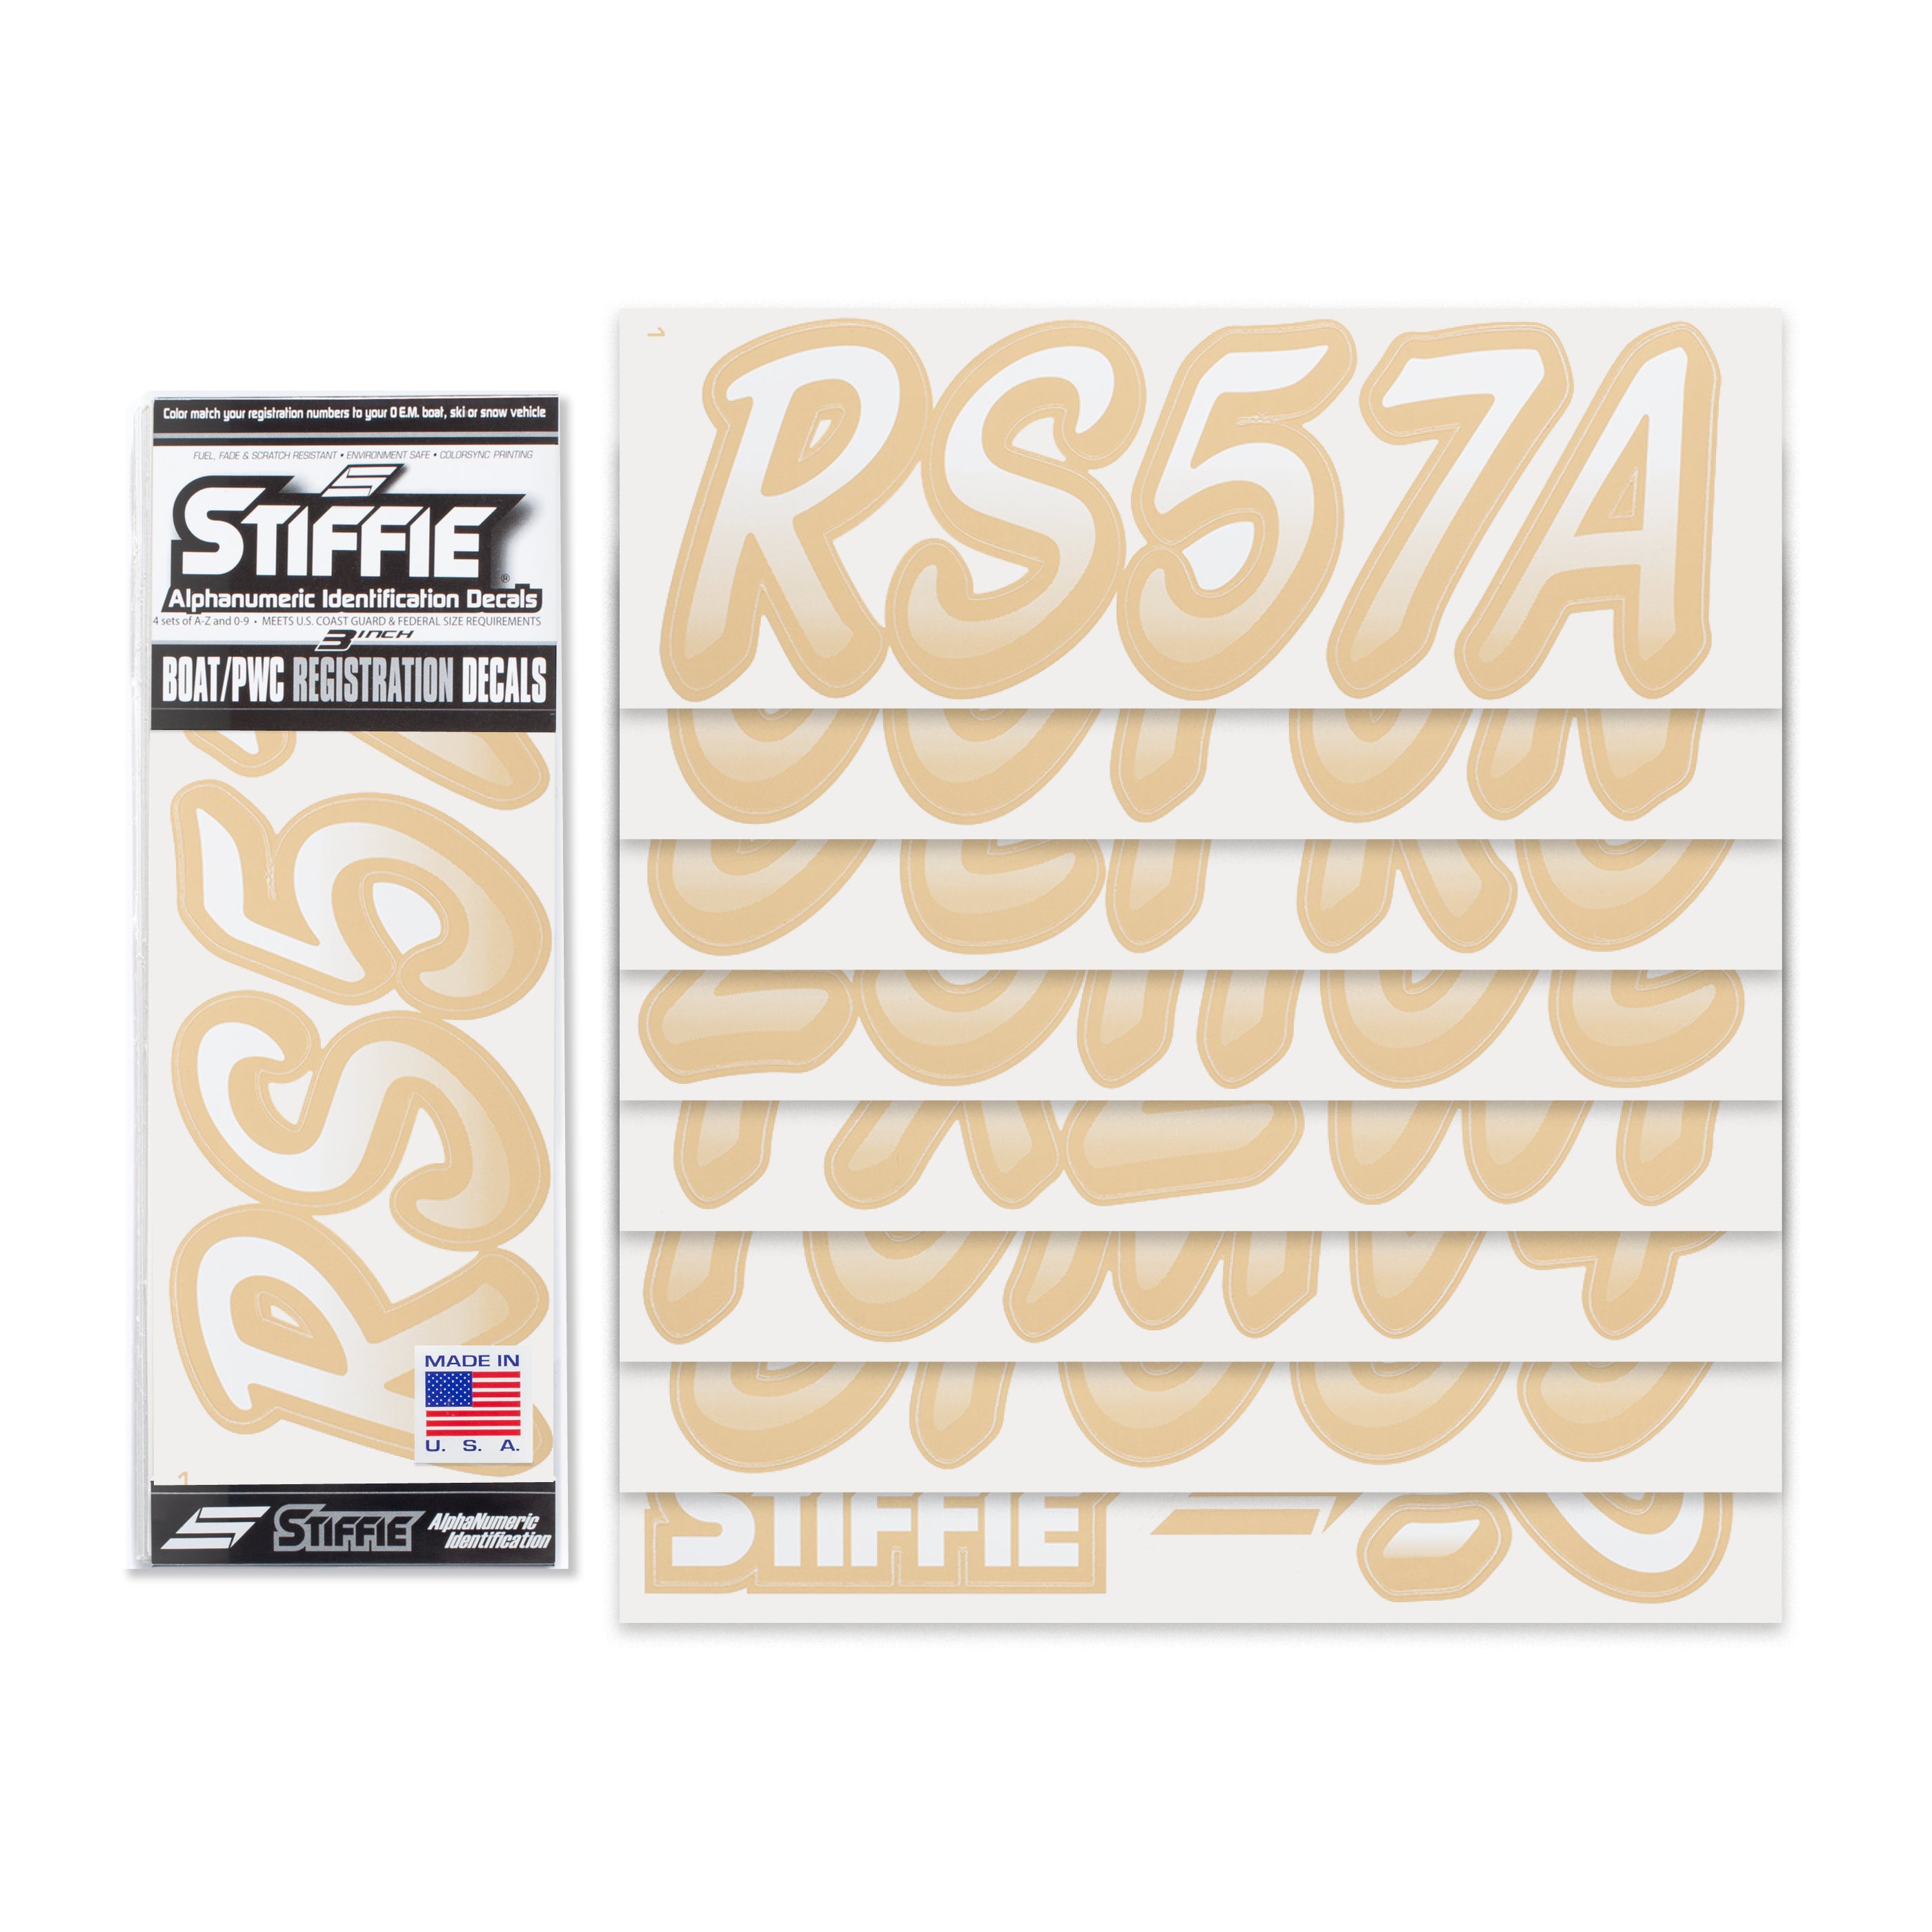 STIFFIE Whipline White/Tan 3" Alpha-Numeric Registration Identification Numbers Stickers Decals for Boats & Personal Watercraft